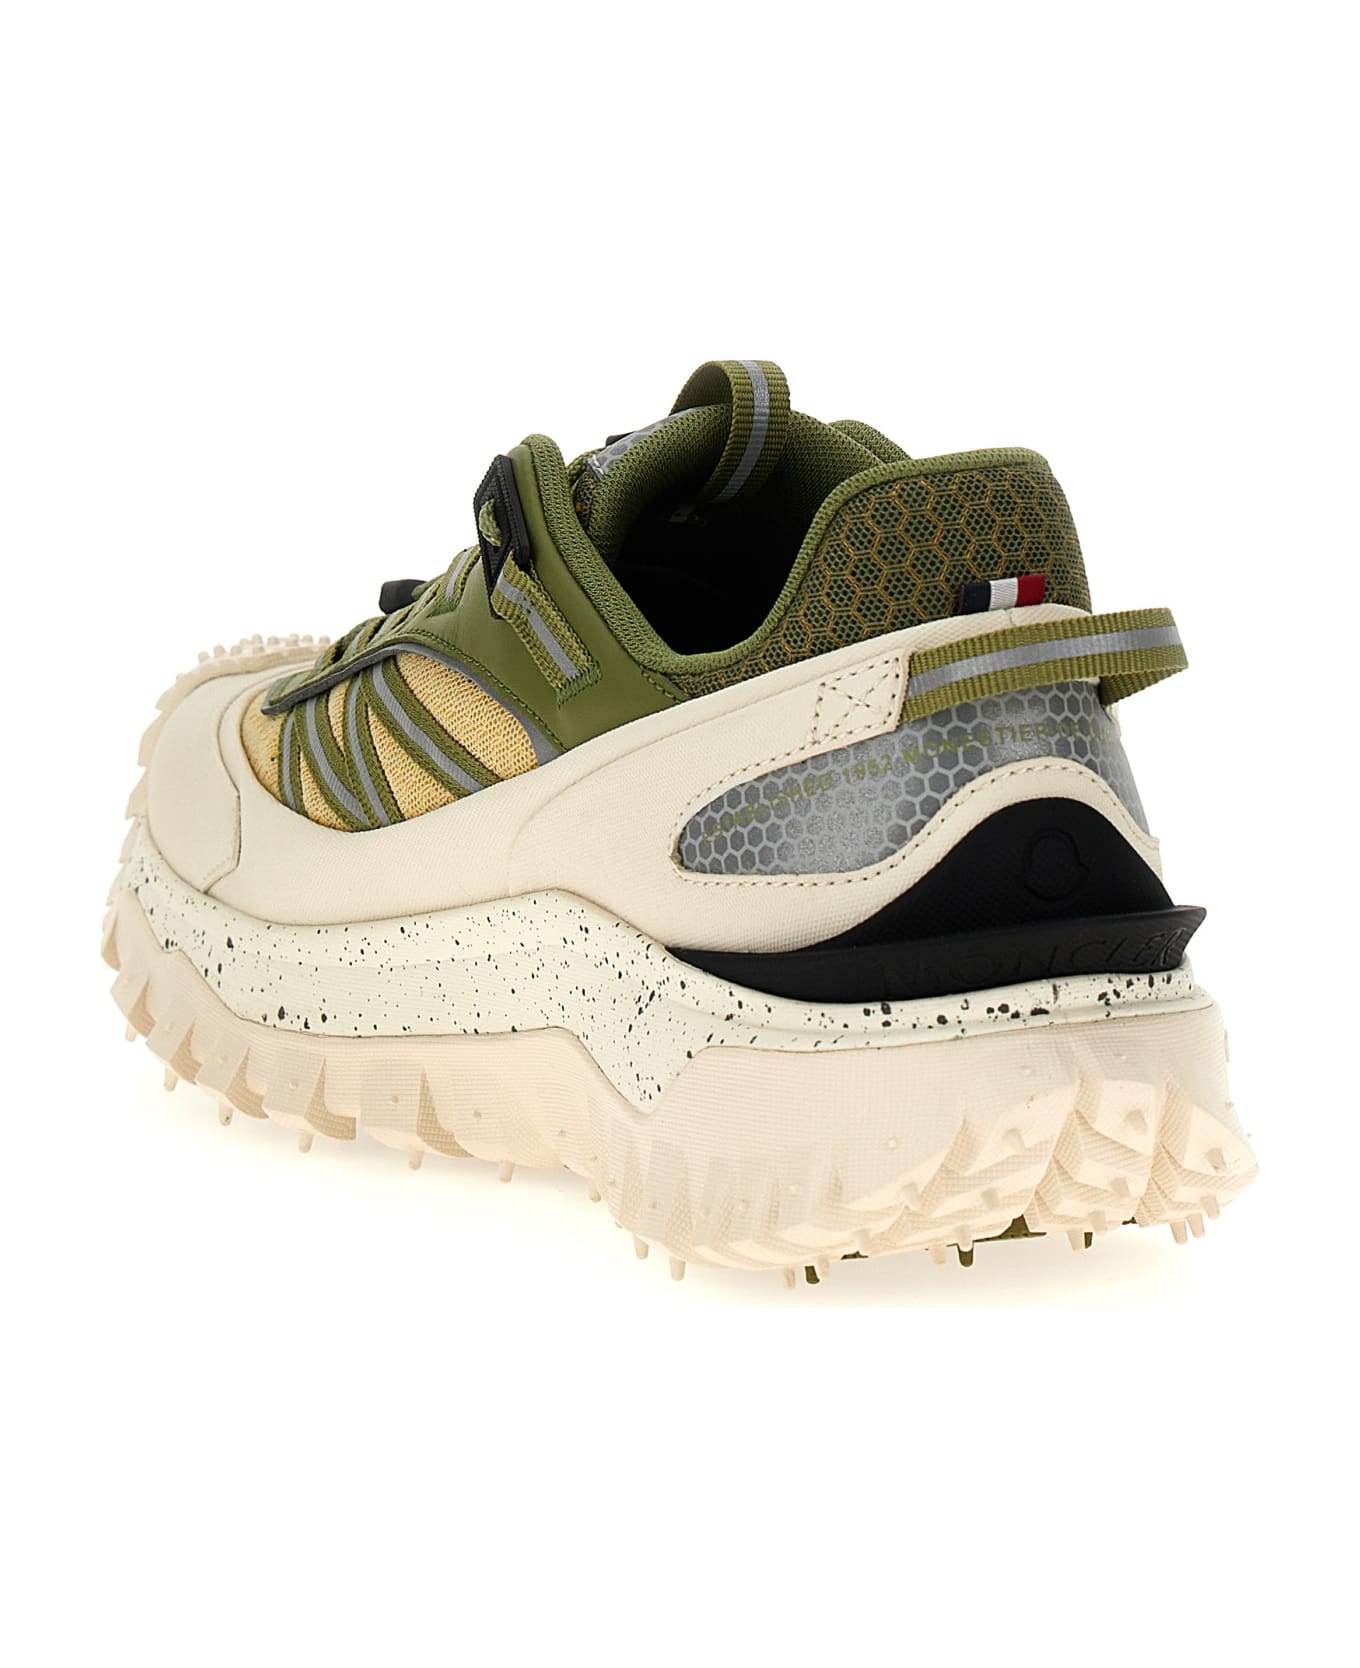 Moncler 'trailgrip' Sneakers - Green